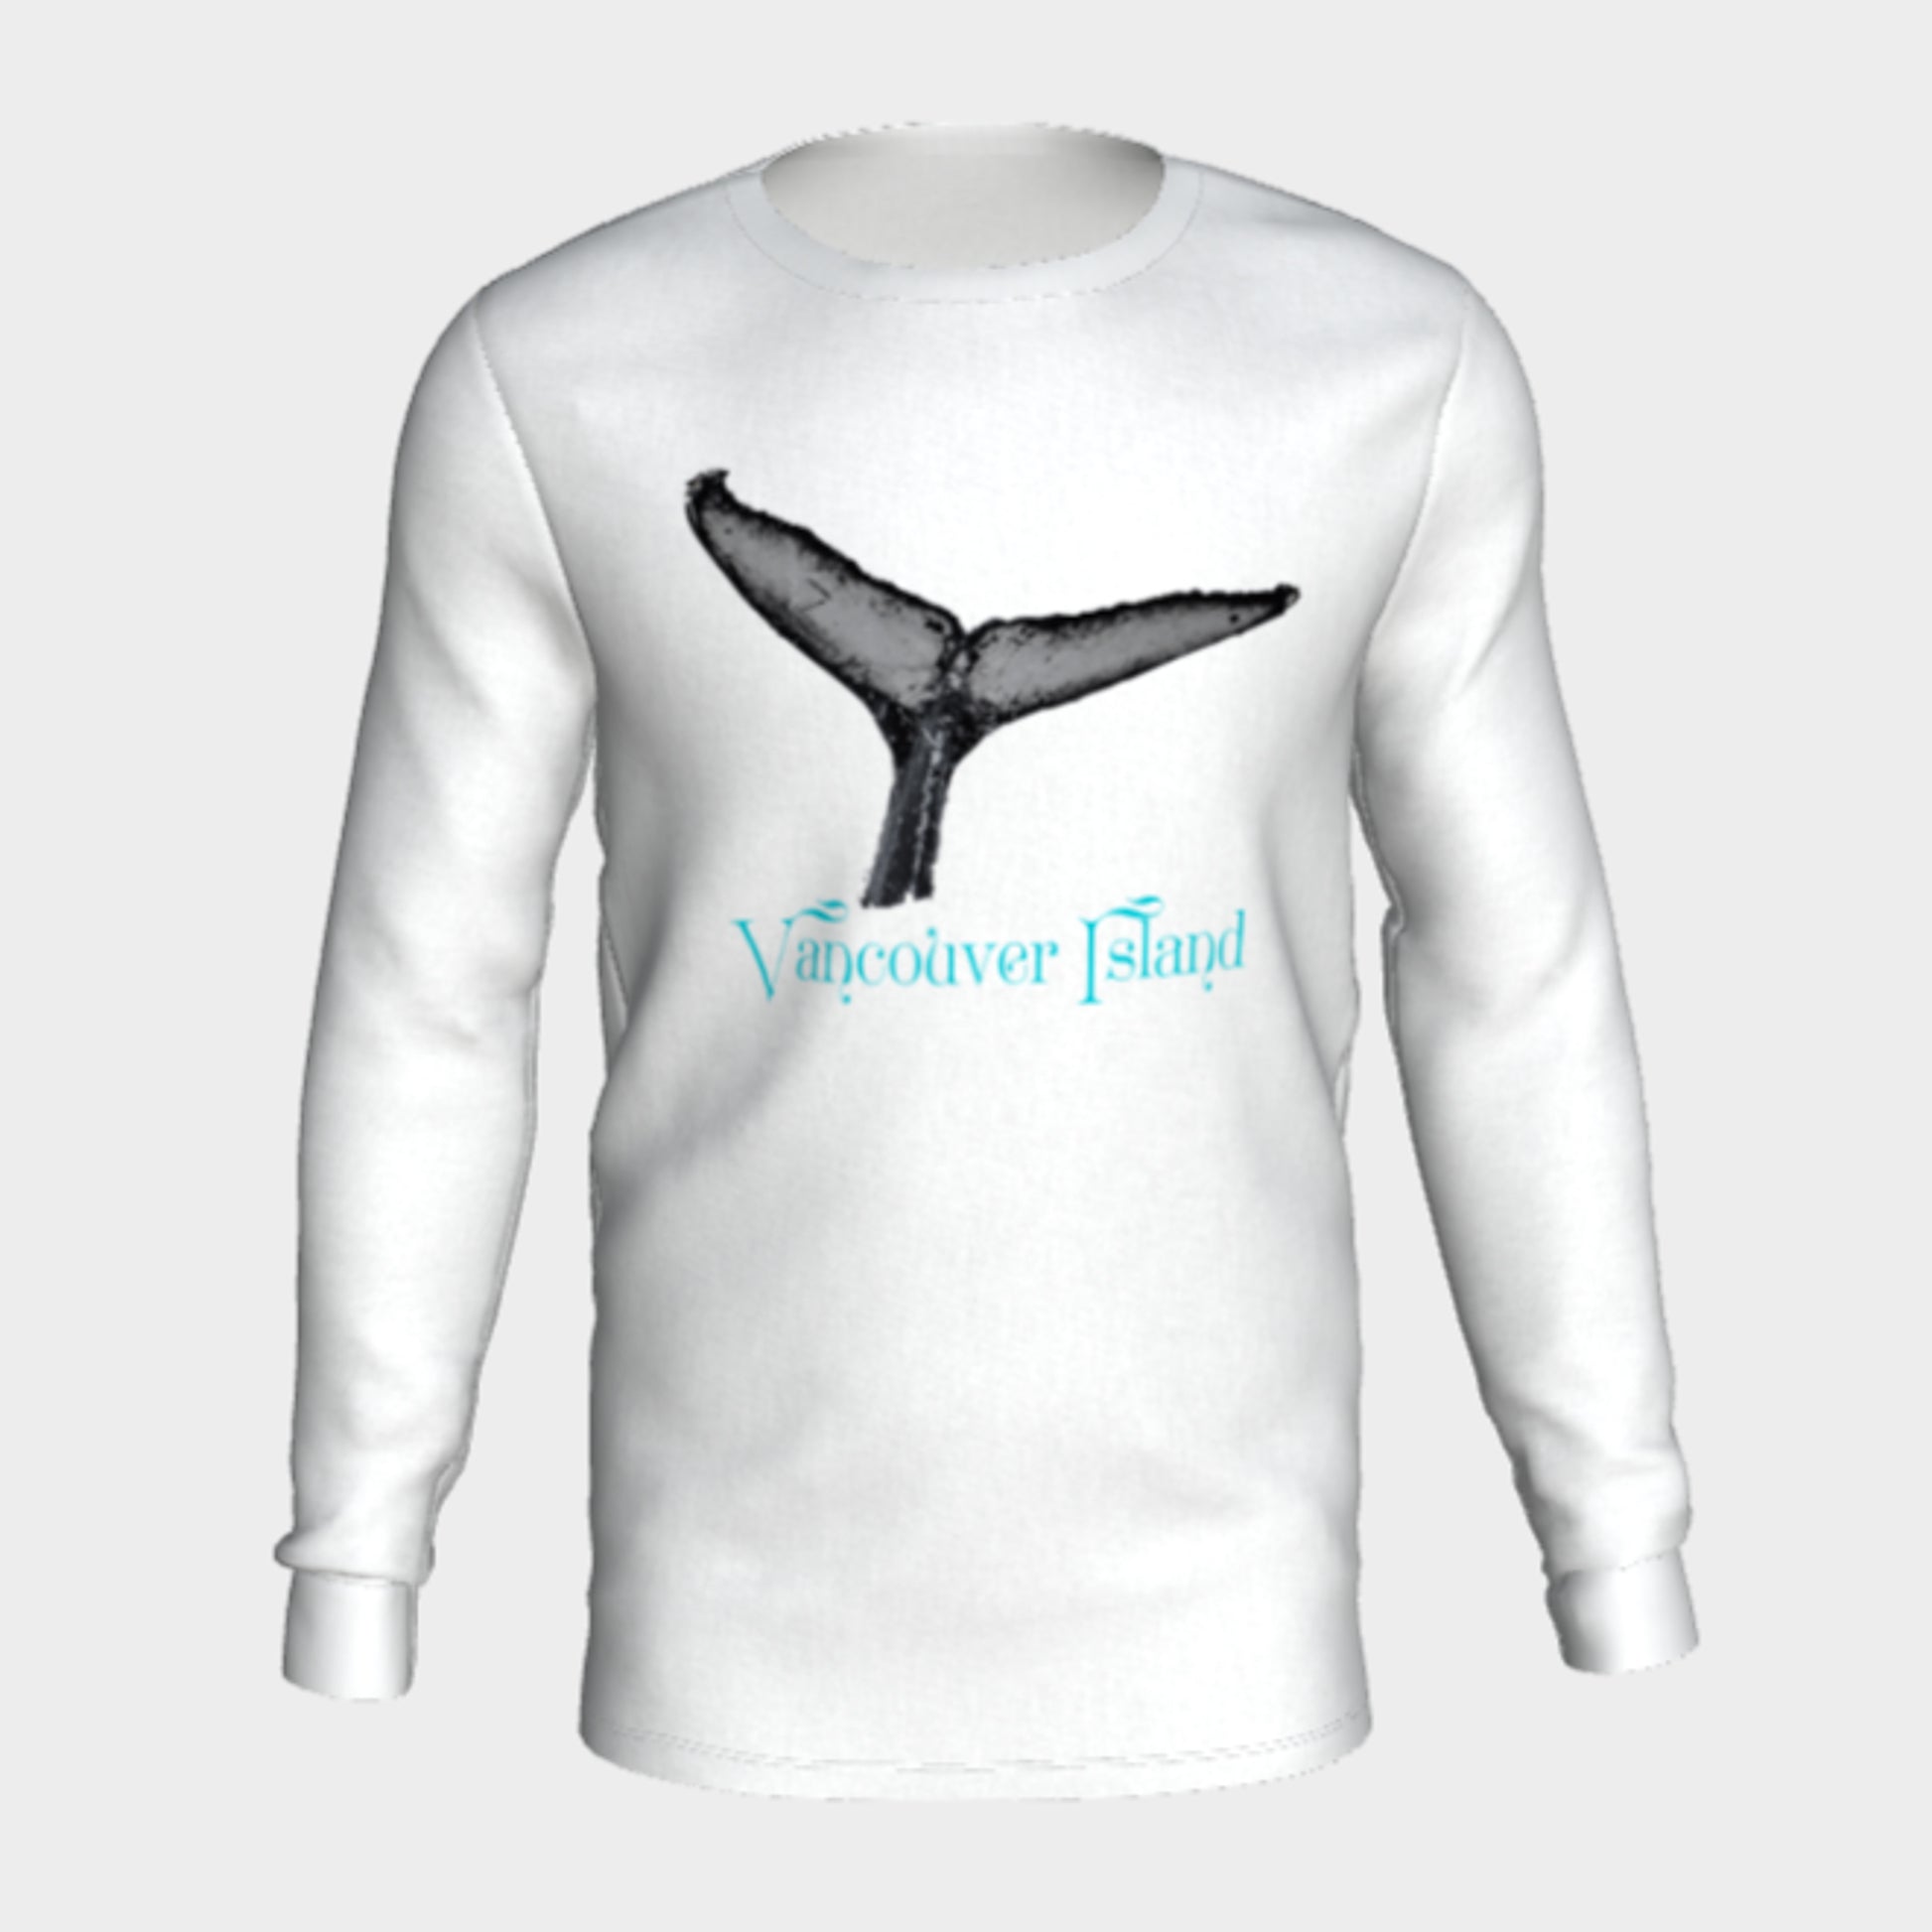 Humpback Whale Tail Vancouver Island Long Sleeve Unisex T-Shirt Features:  Flattering unisex fit Cozy long sleeves Crew neck Made with Milltex lightweight fabric Sizes small to 2XL